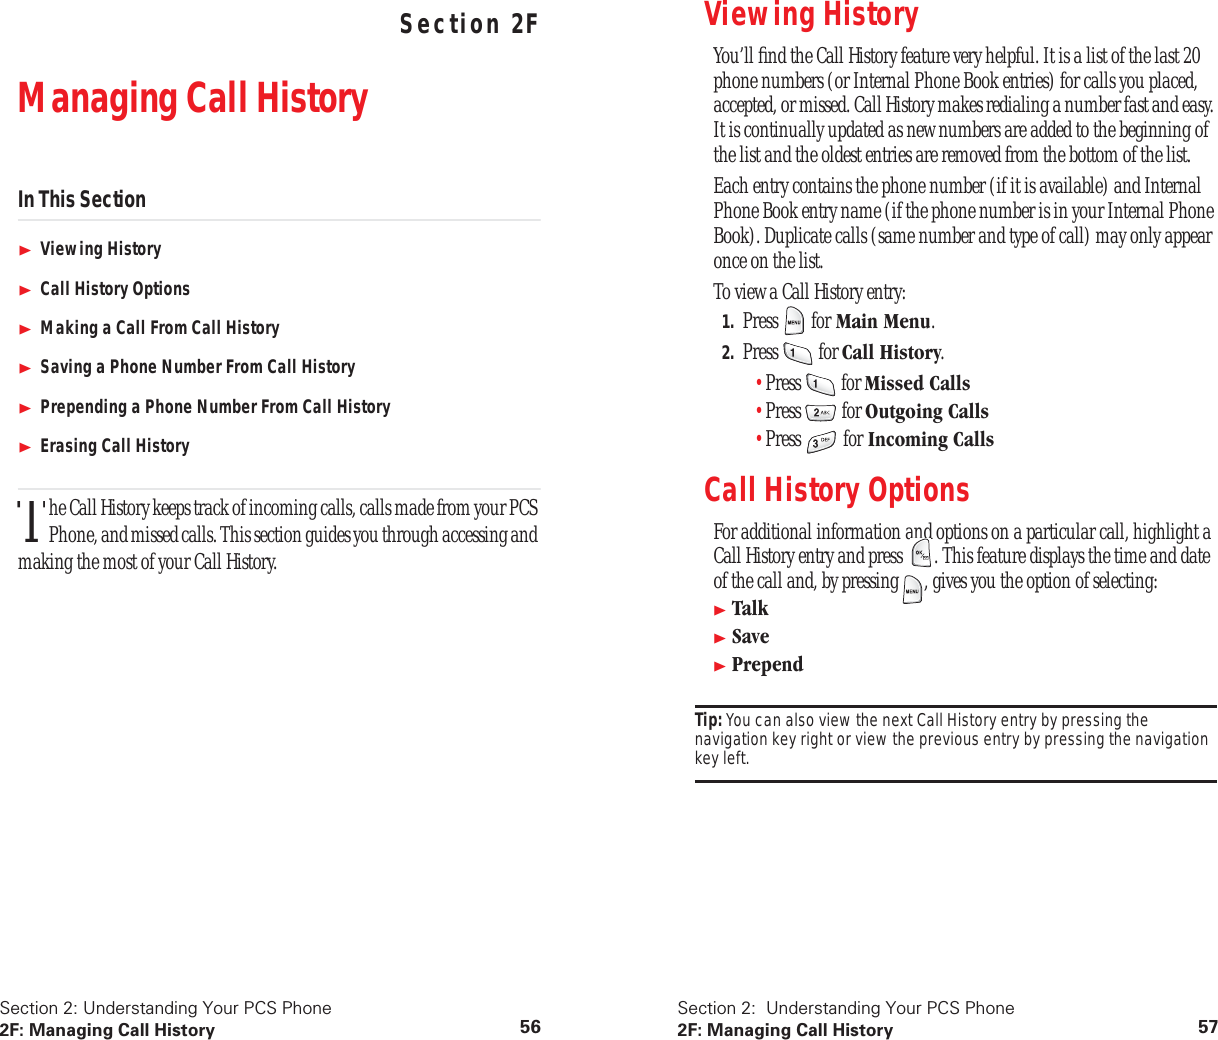 Section 2: Understanding Your PCS Phone2F: Managing Call History 56 Understanding Your PCS PhoneSection 2FManaging Call HistoryIn This SectionViewing HistoryCall History OptionsMaking a Call From Call HistorySaving a Phone Number From Call HistoryPrepending a Phone Number From Call HistoryErasing Call Historyhe Call History keeps track of incoming calls, calls made from your PCS Phone, and missed calls. This section guides you through accessing and making the most of your Call History.TSection 2:  Understanding Your PCS Phone2F: Managing Call History 57Viewing History You’ll ﬁnd the Call History feature very helpful. It is a list of the last 20 phone numbers (or Internal Phone Book entries) for calls you placed, accepted, or missed. Call History makes redialing a number fast and easy. It is continually updated as new numbers are added to the beginning of the list and the oldest entries are removed from the bottom of the list.Each entry contains the phone number (if it is available) and Internal Phone Book entry name (if the phone number is in your Internal Phone Book). Duplicate calls (same number and type of call) may only appear once on the list.To view a Call History entry:1. Press  for Main Menu.2. Press  for Call History.•Press  for Missed Calls•Press  for Outgoing Calls•Press  for Incoming CallsCall History OptionsFor additional information and options on a particular call, highlight a Call History entry and press  . This feature displays the time and date of the call and, by pressing  , gives you the option of selecting:TalkSavePrependTip: You can also view the next Call History entry by pressing the navigation key right or view the previous entry by pressing the navigation key left.